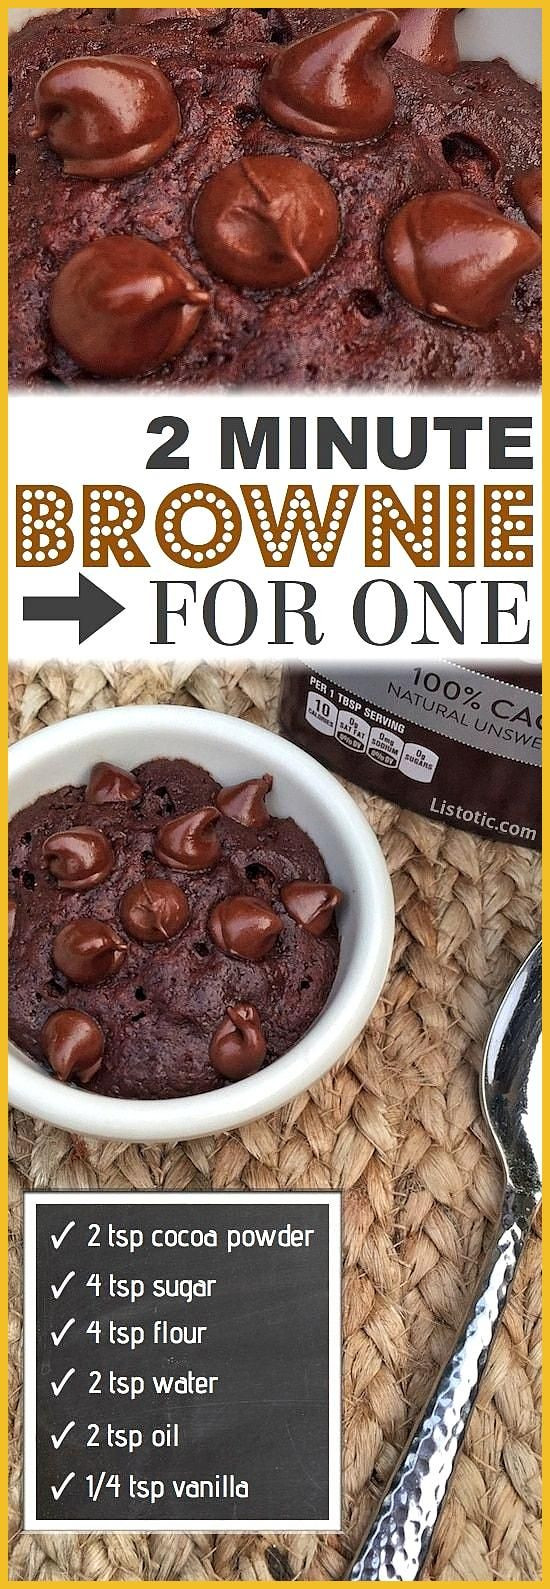 Best Microwave Desserts
 The BEST easy mug cake microwave recipe Brownie for one An